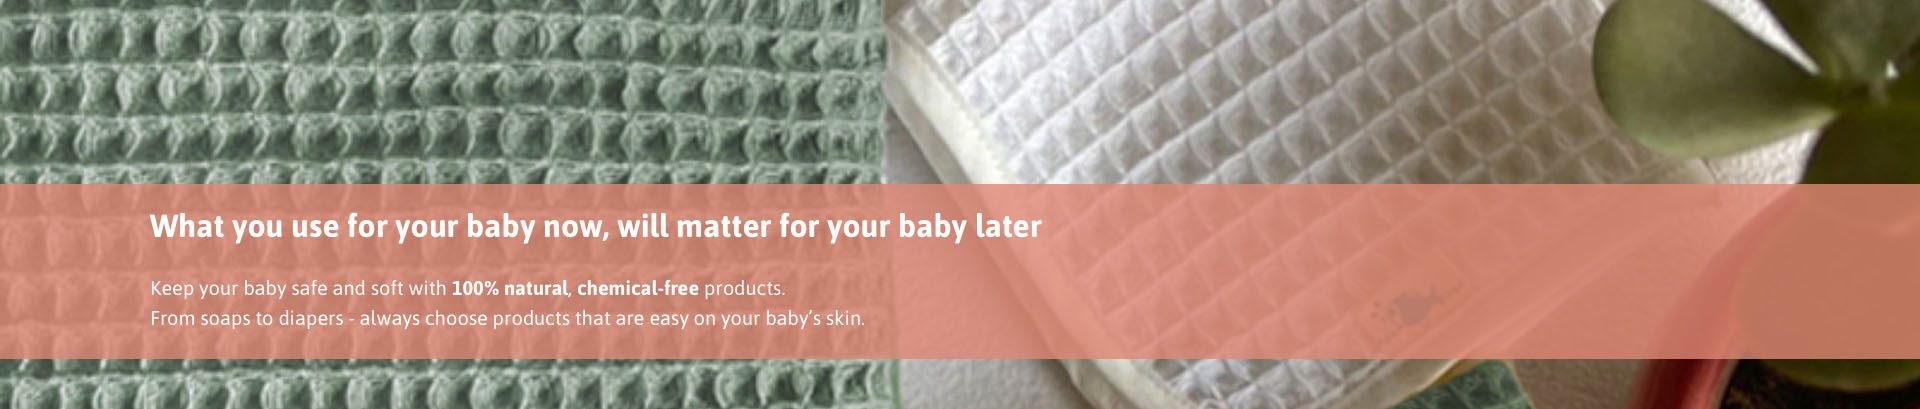 Baby's day out - Baby essentials Banner